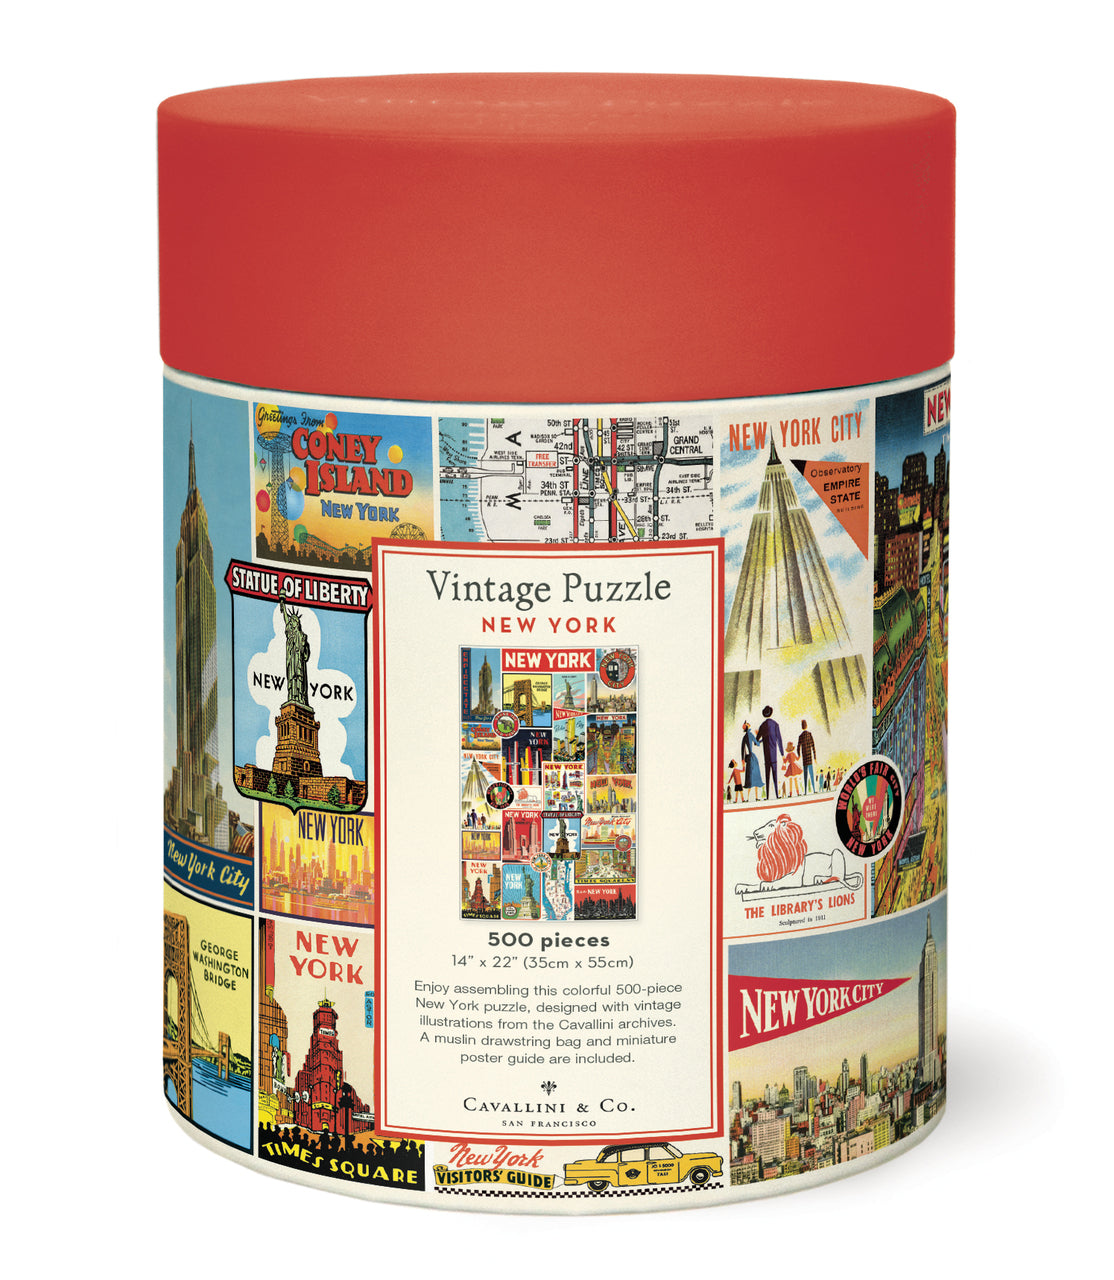 The 500 piece puzzles are packaged in a 6.5 inch long cardboard tube, with puzzle pieces safely stored in a muslin bag inside.